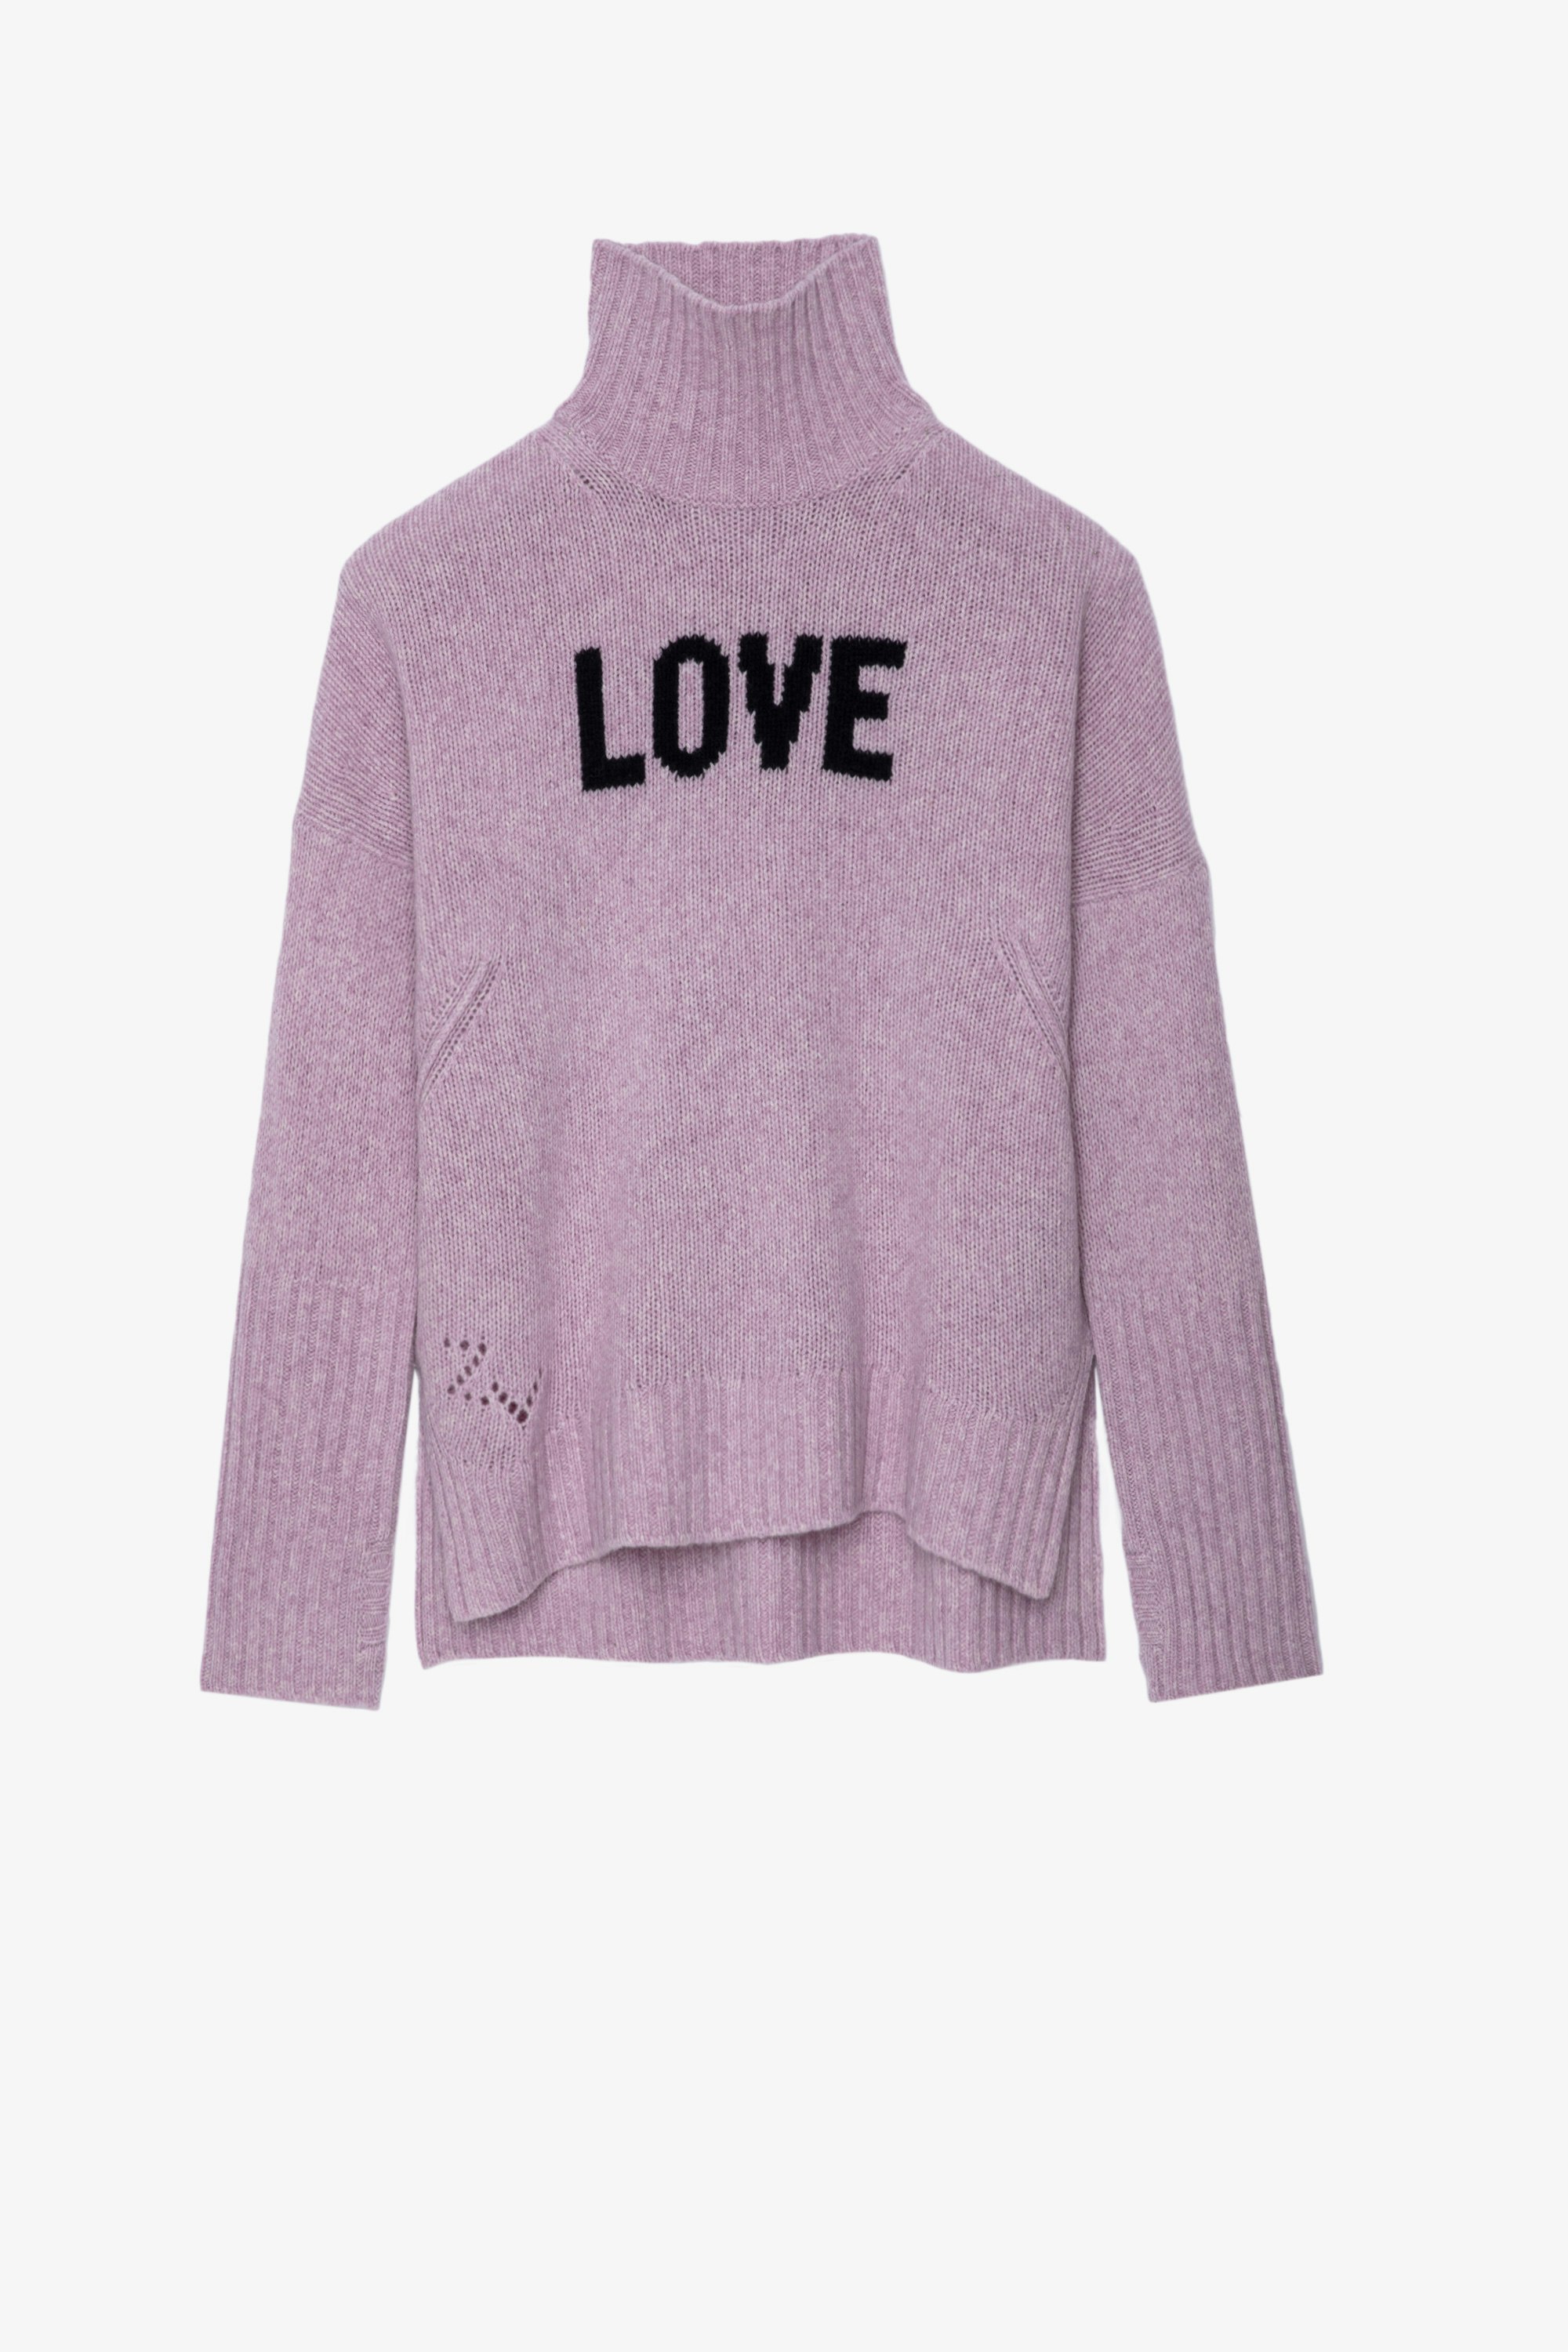 Alma Love Jumper Women’s light pink merino knit jumper with contrasting “Love” mantra and high neck